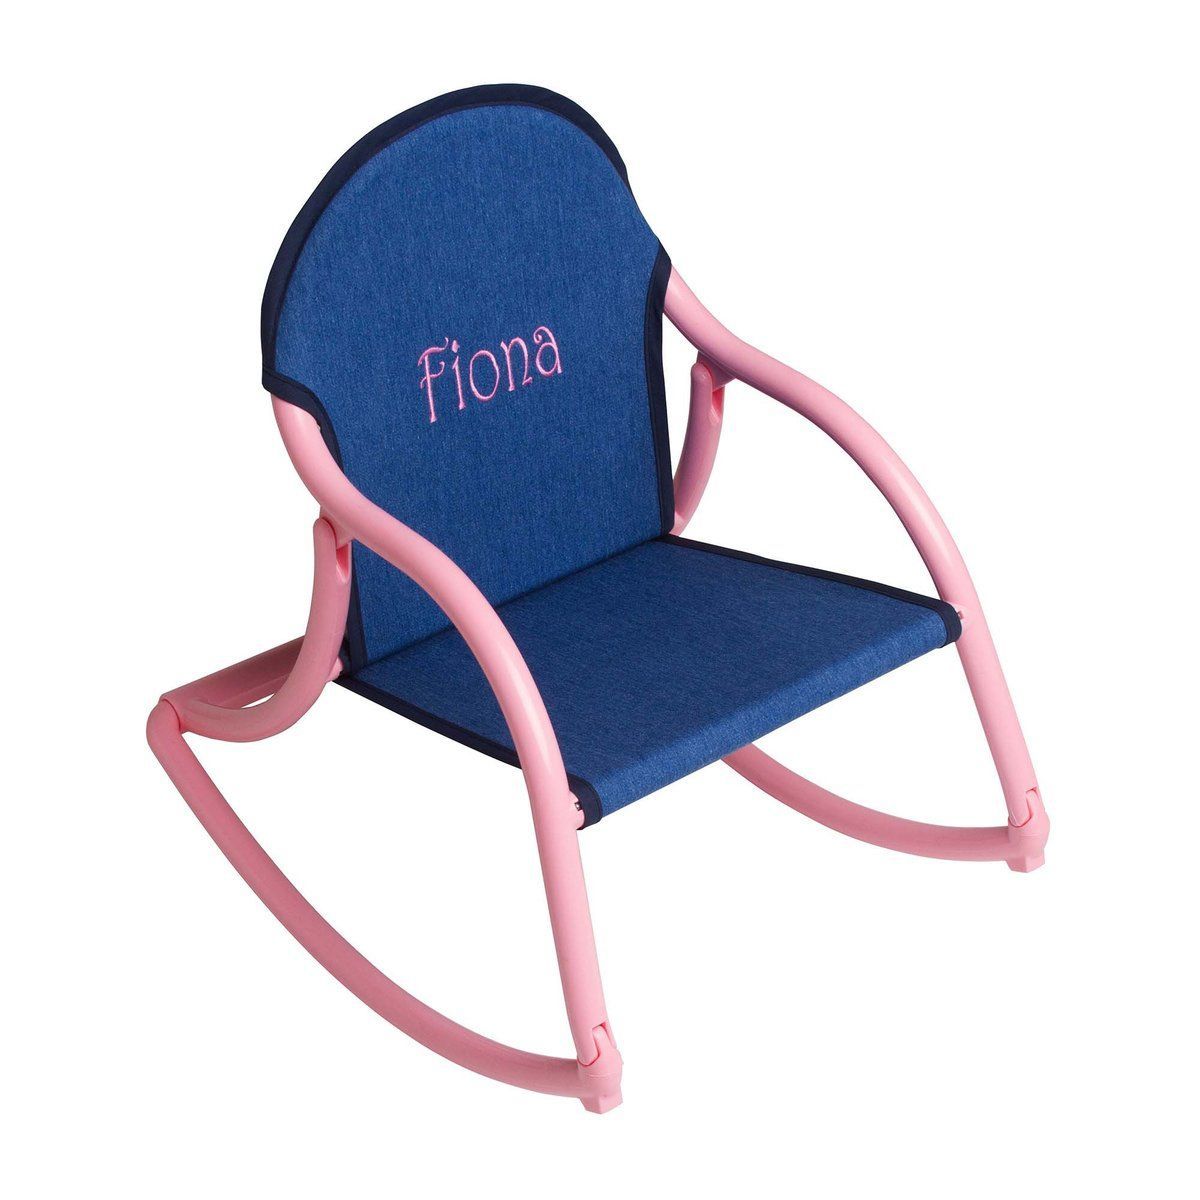 Personalized Childrens Rocking Chair | Rocking Chair Within Personalized Kids Chairs And Sofas (View 2 of 15)